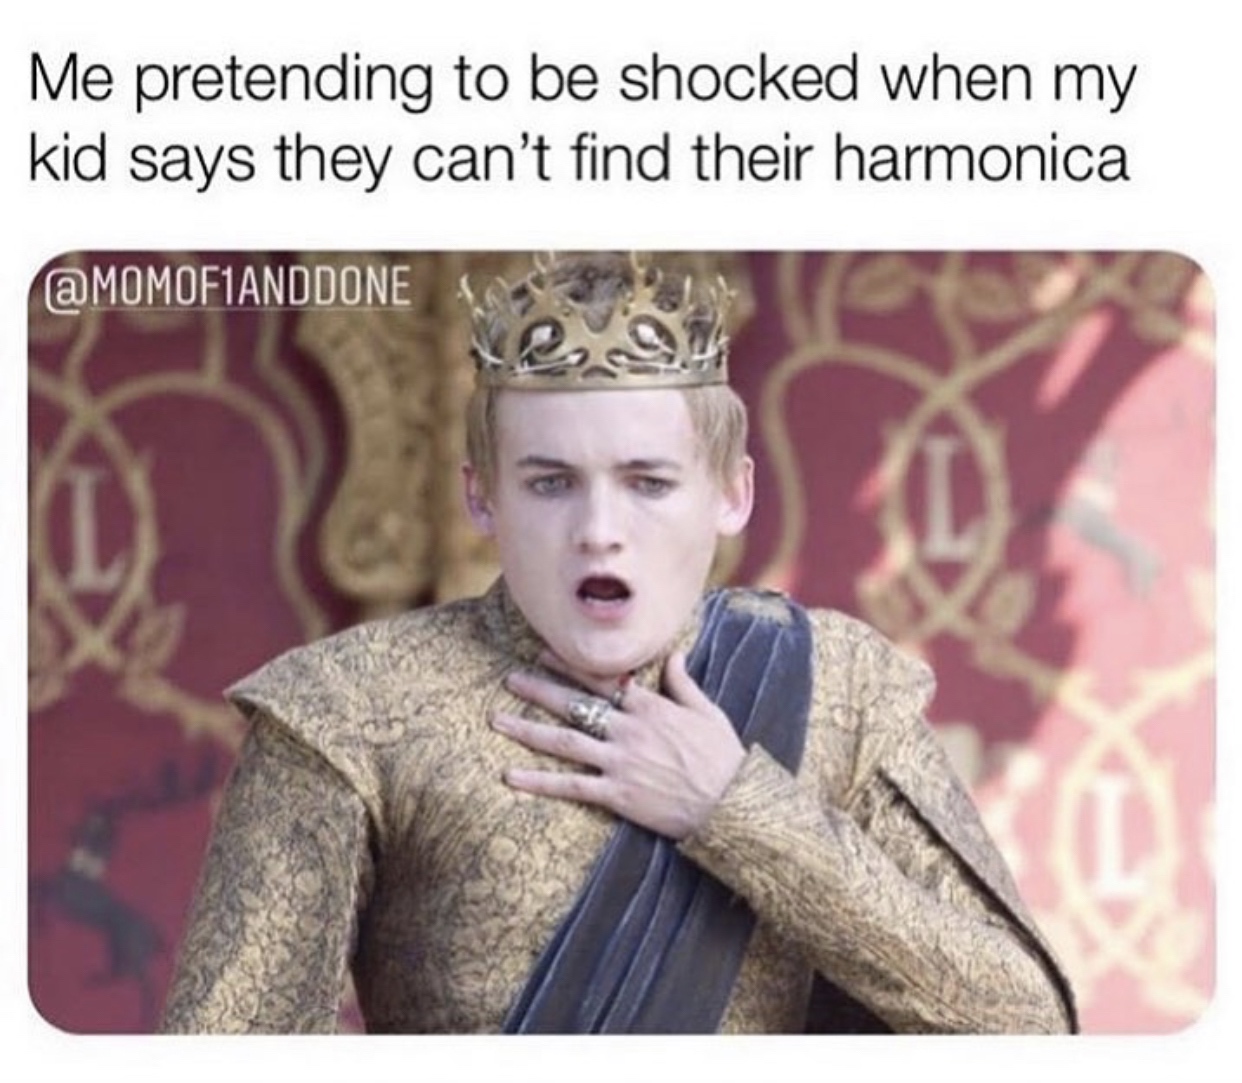 nat 20's - Me pretending to be shocked when my kid says they can't find their harmonica